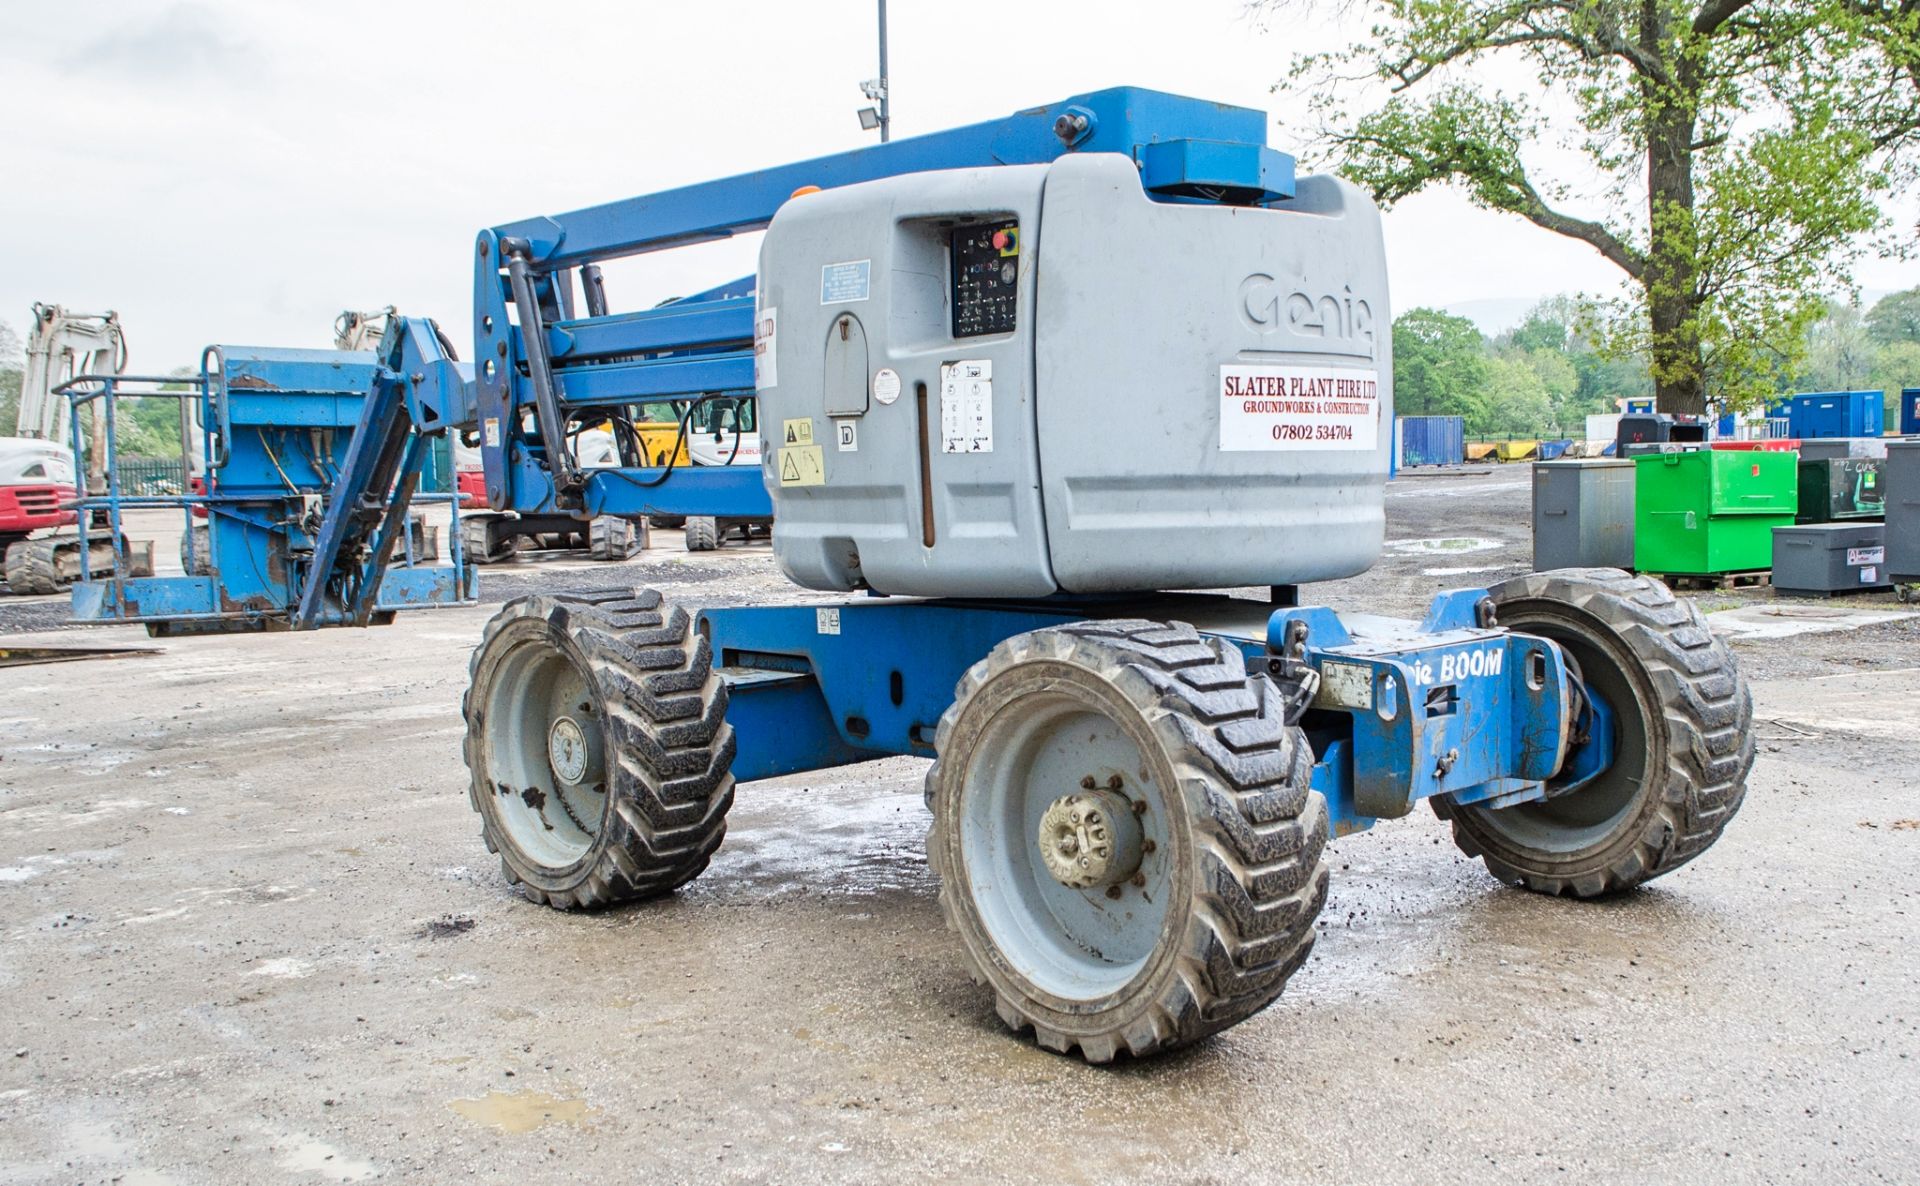 Genie Z-45/25 diesel/battery electric articulated boom access platform Year: 2006 S/N: 31844 - Image 4 of 17